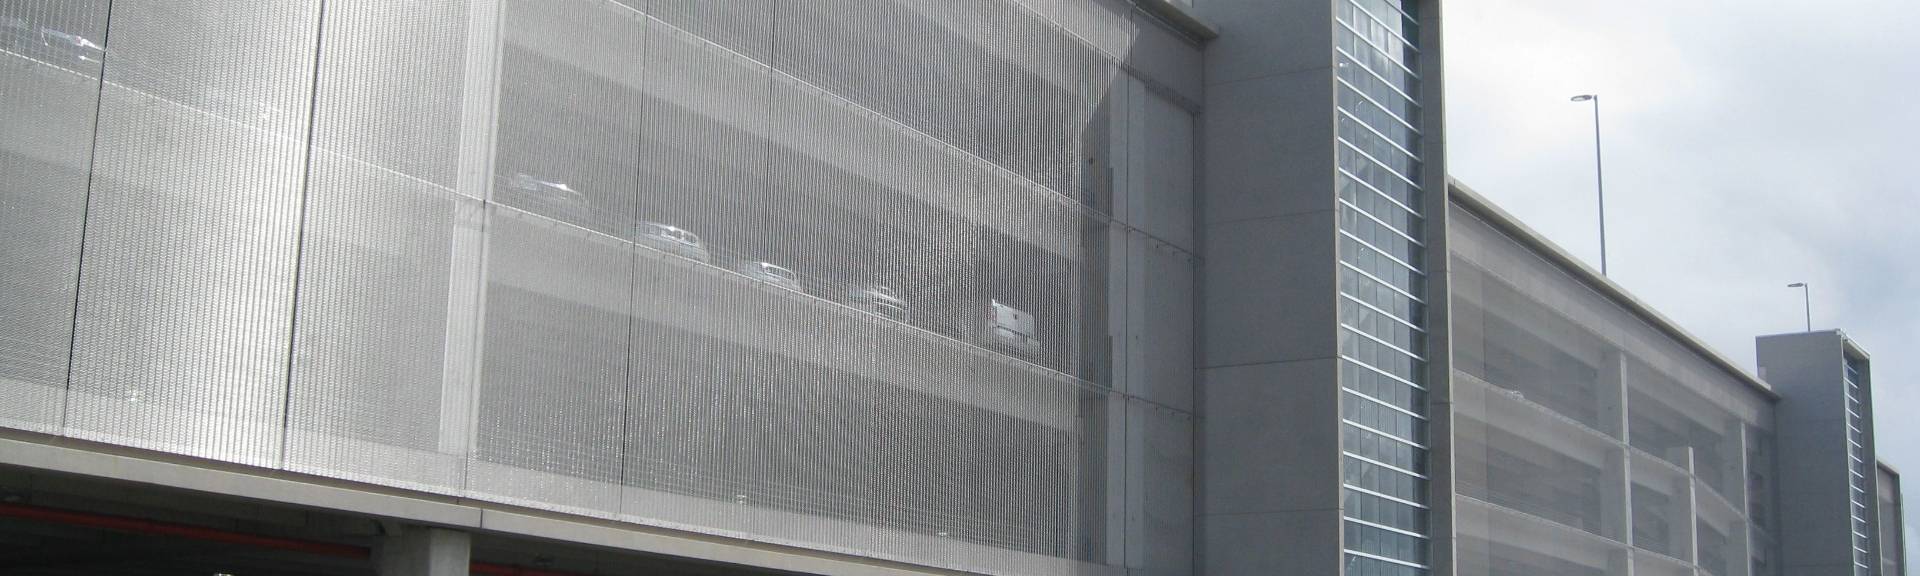 Argger architectural mesh is used as parking screen.